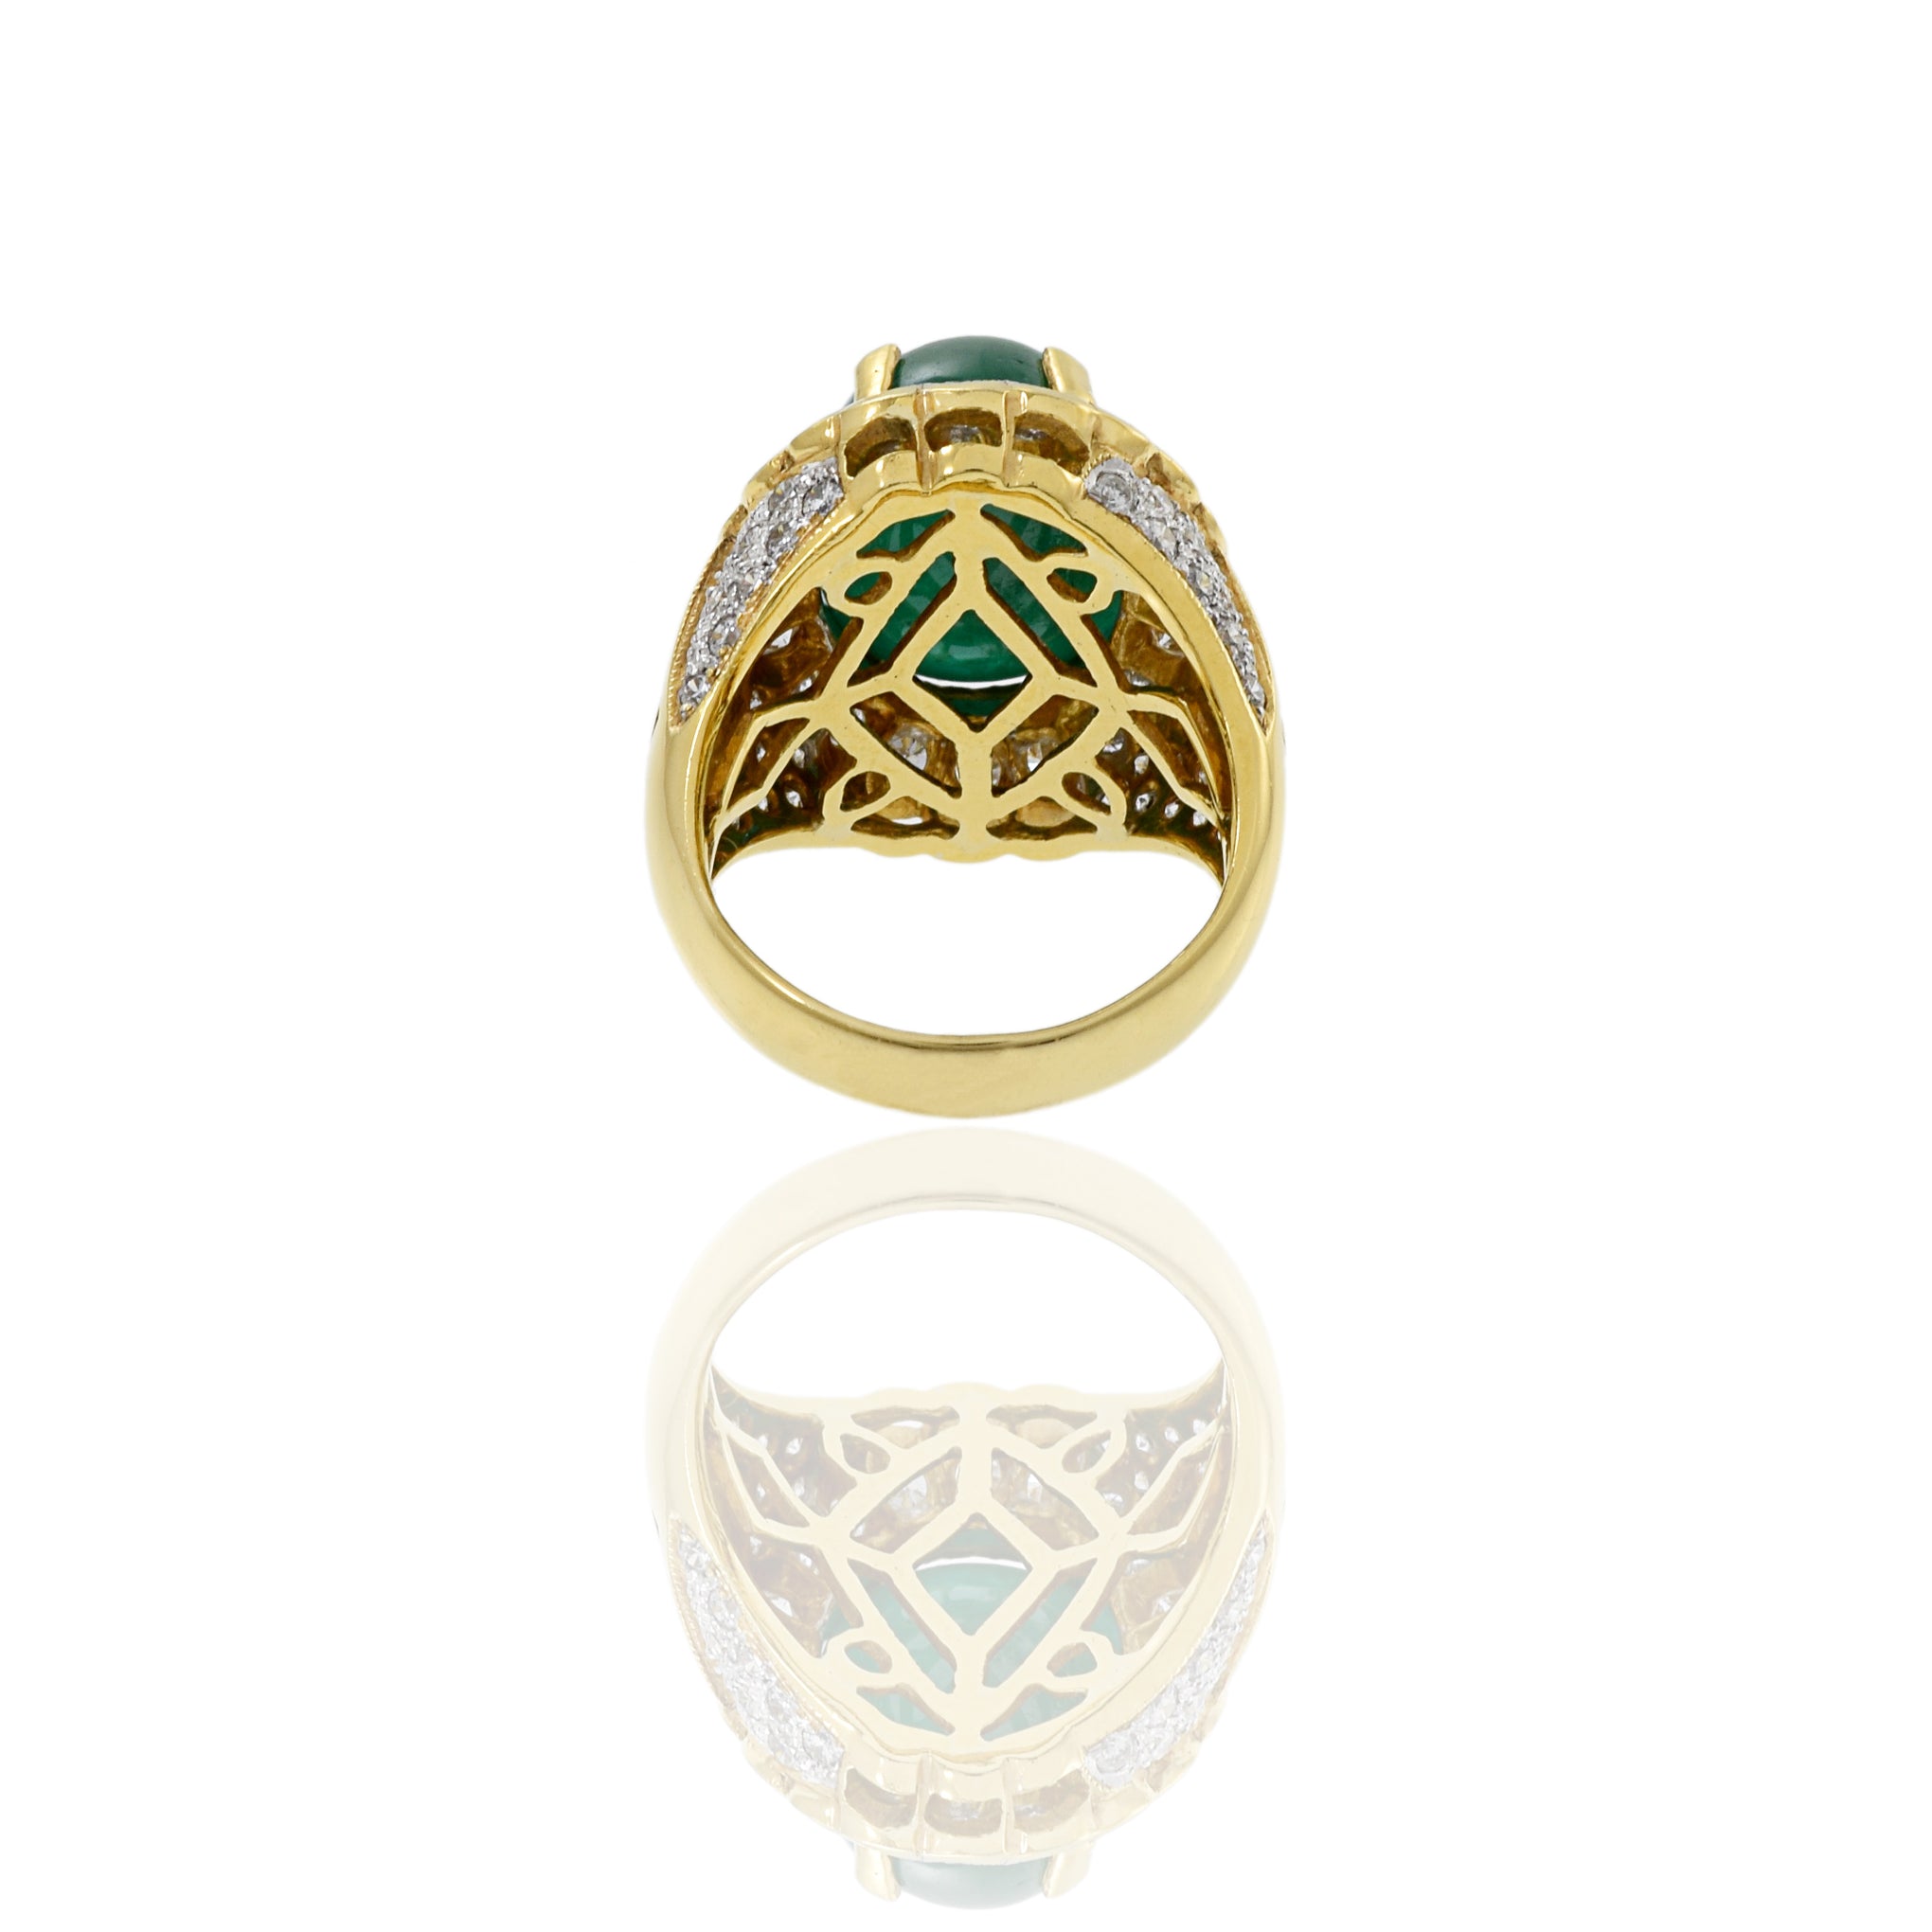 18kt Yellow Gold, Emerald and Diamond Ring